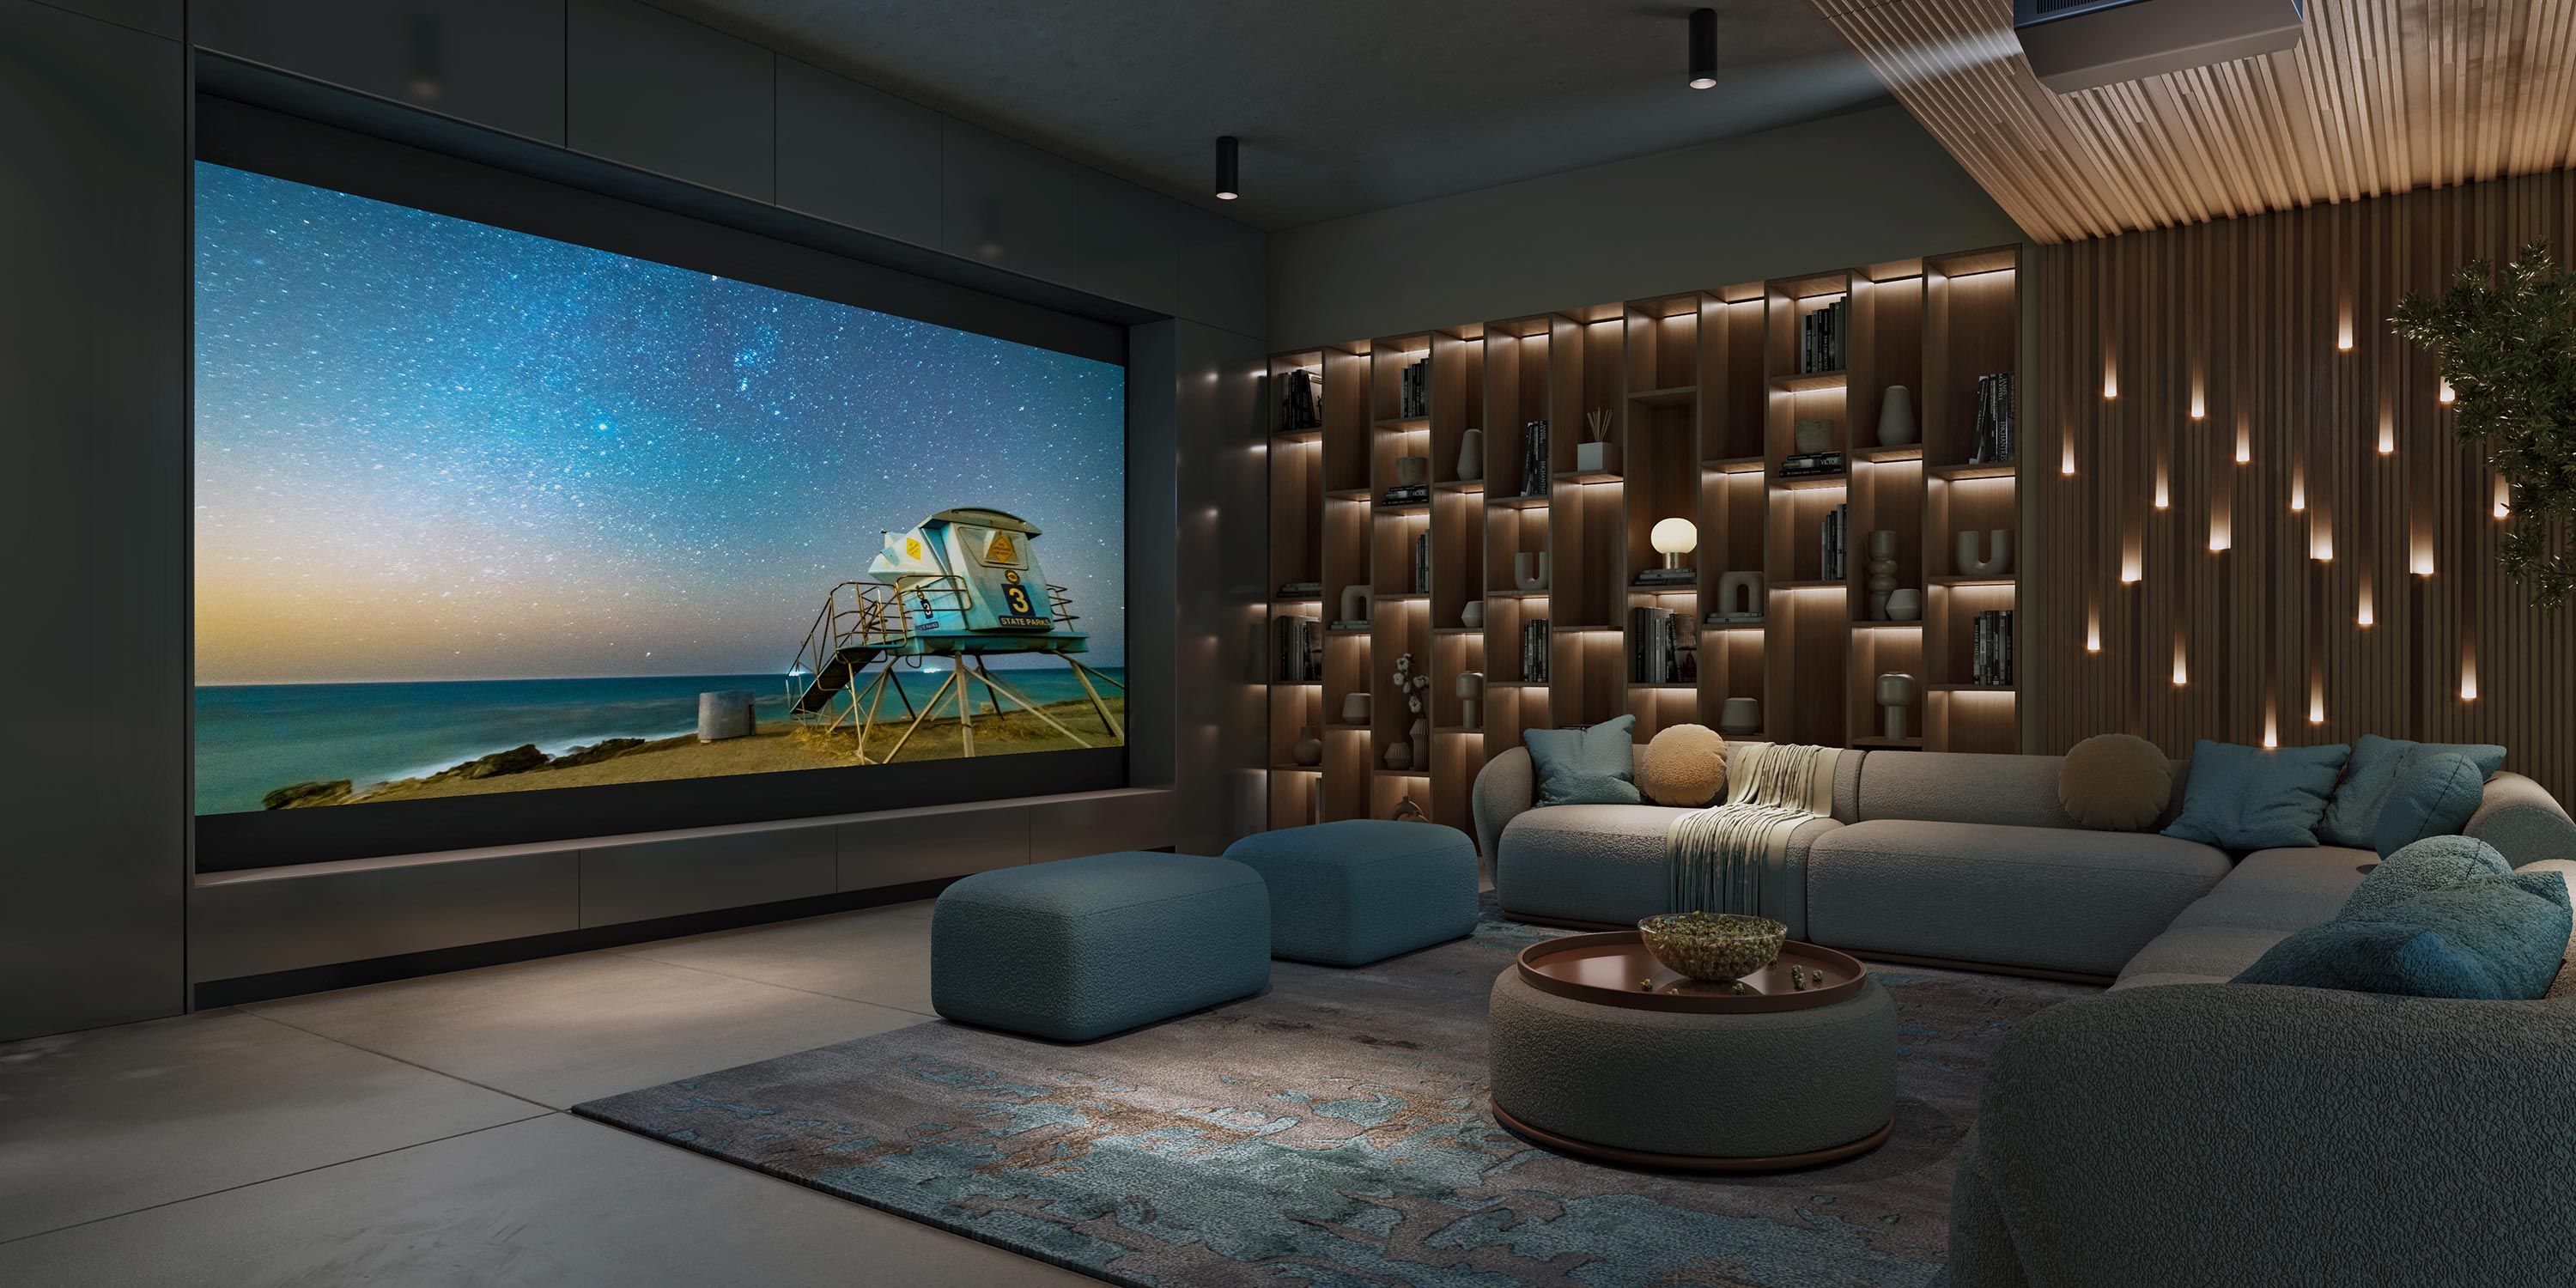 A cozy home theater with a large screen displaying a lifeguard tower on a beach at sunset, surrounded by comfortable seating and stylish shelving with decorative items.